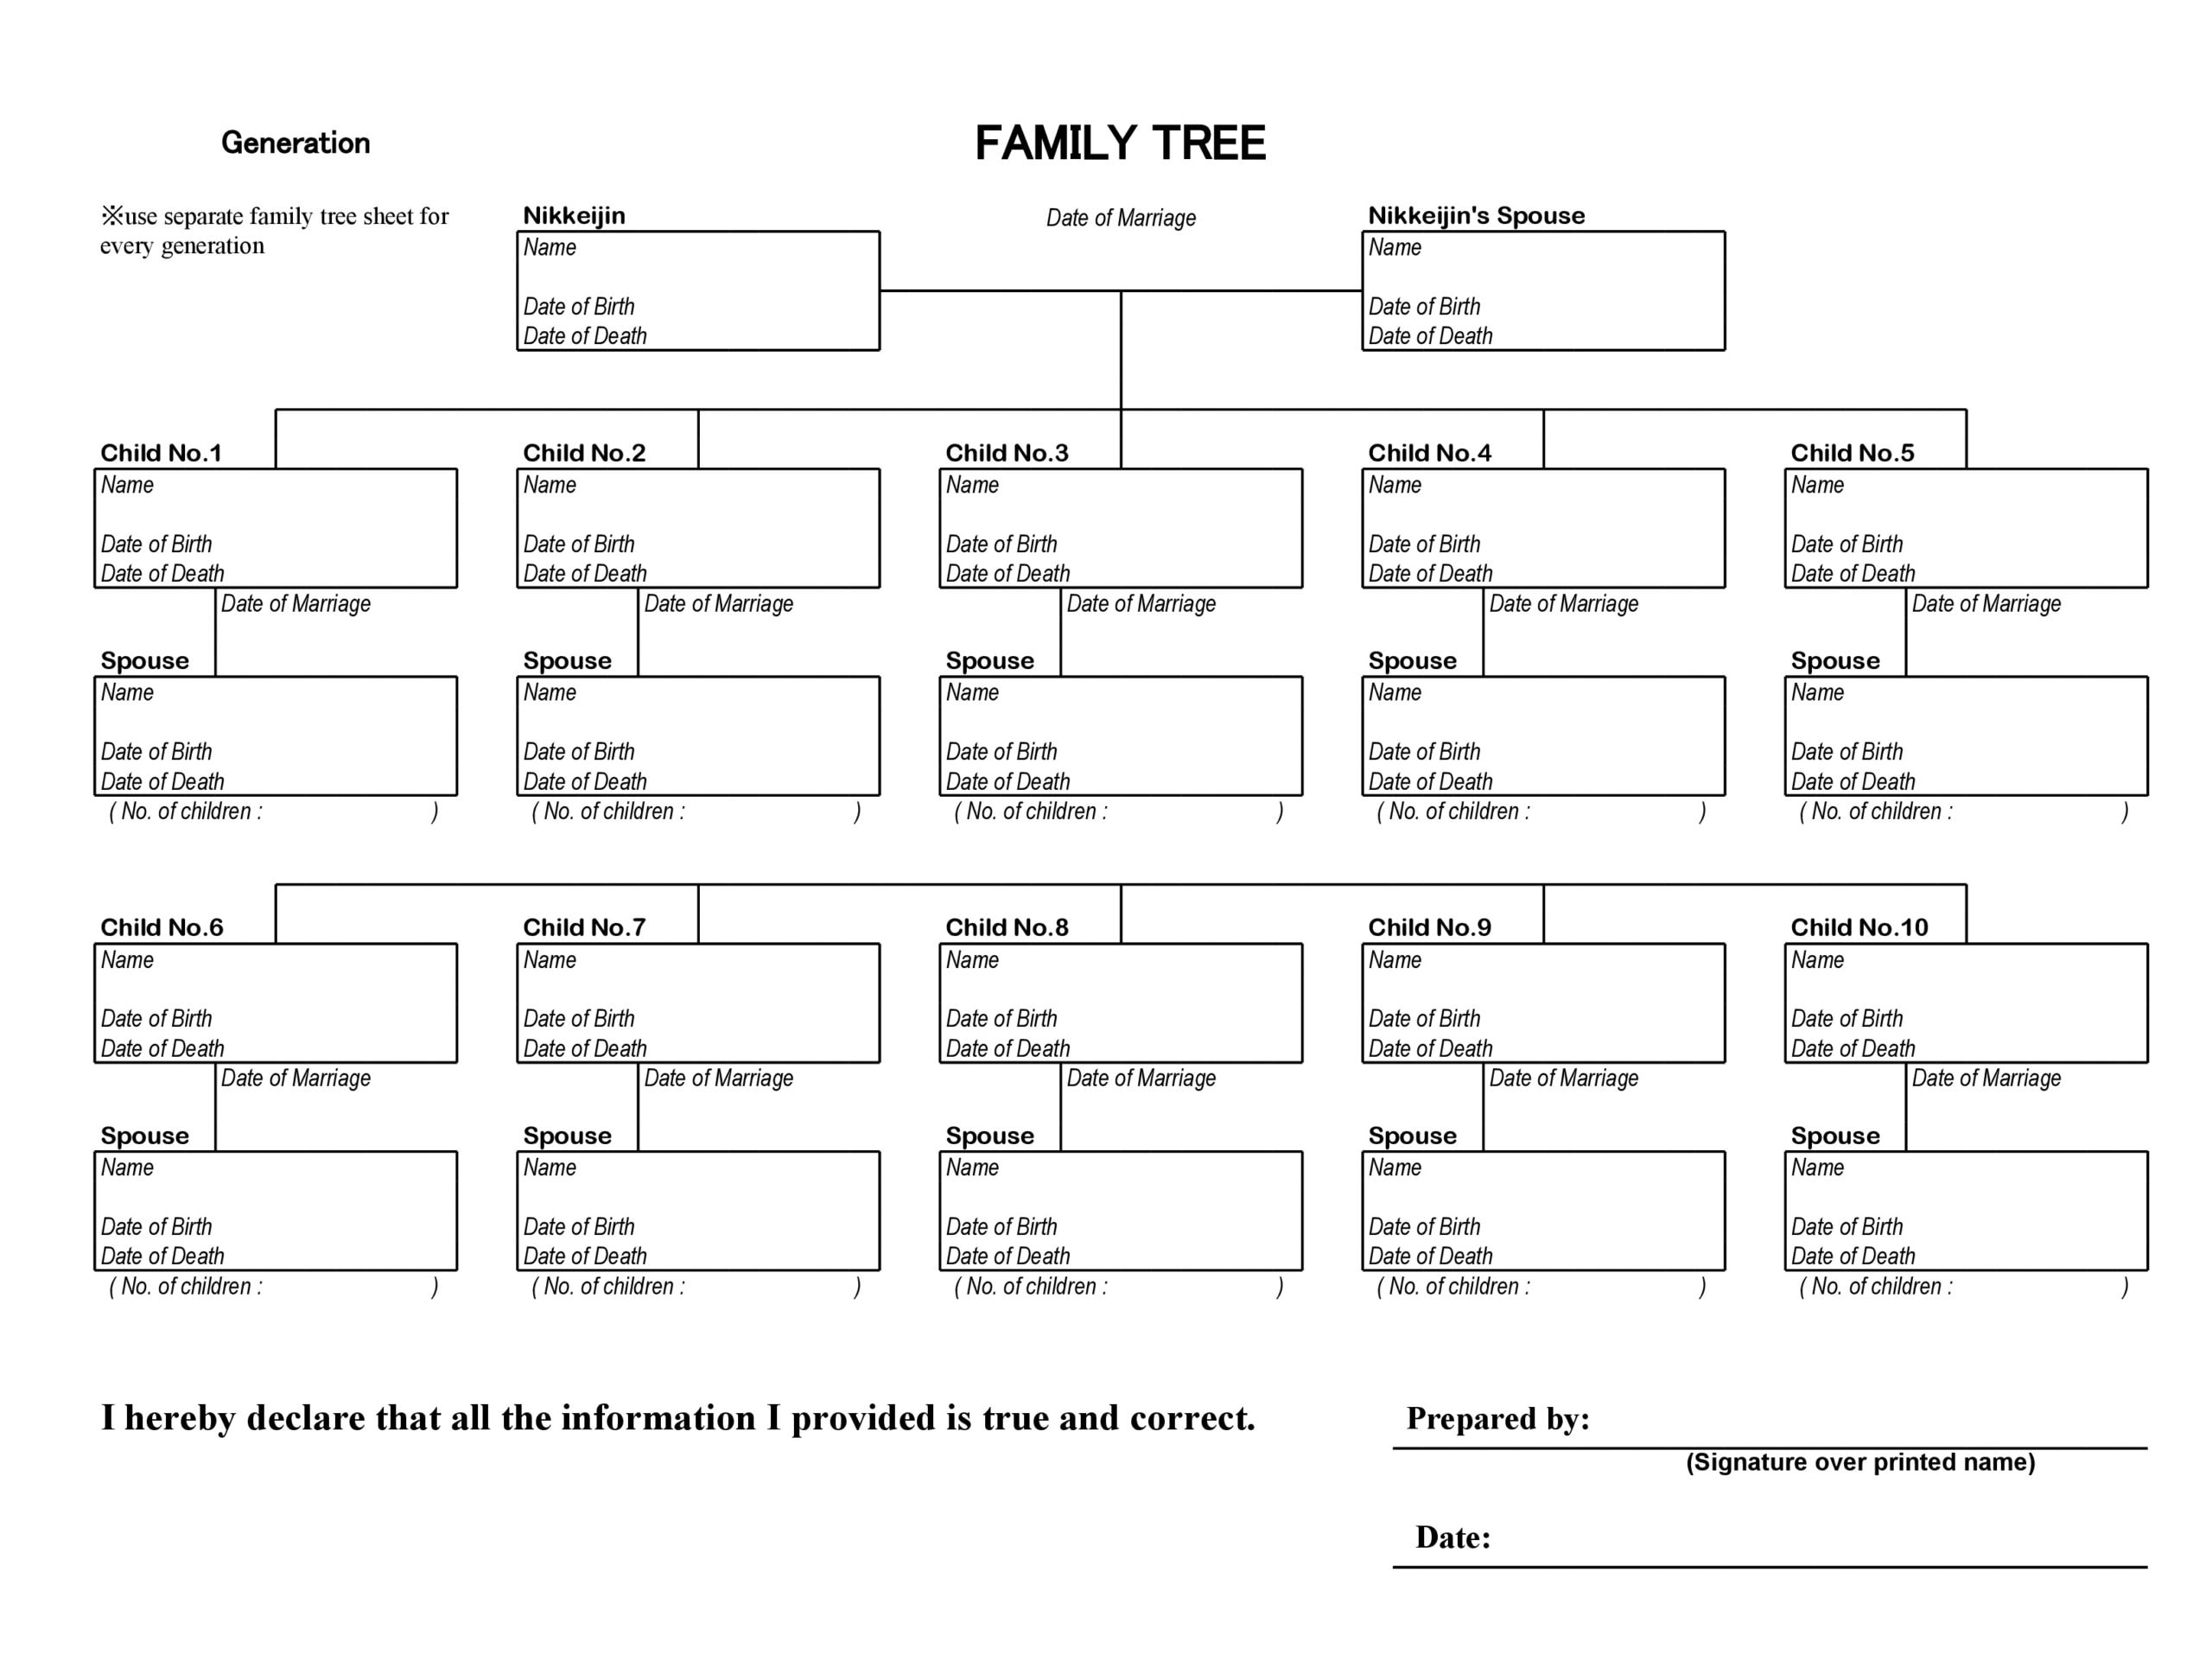 30 Editable Family Tree Templates [100% Free] - TemplateArchive